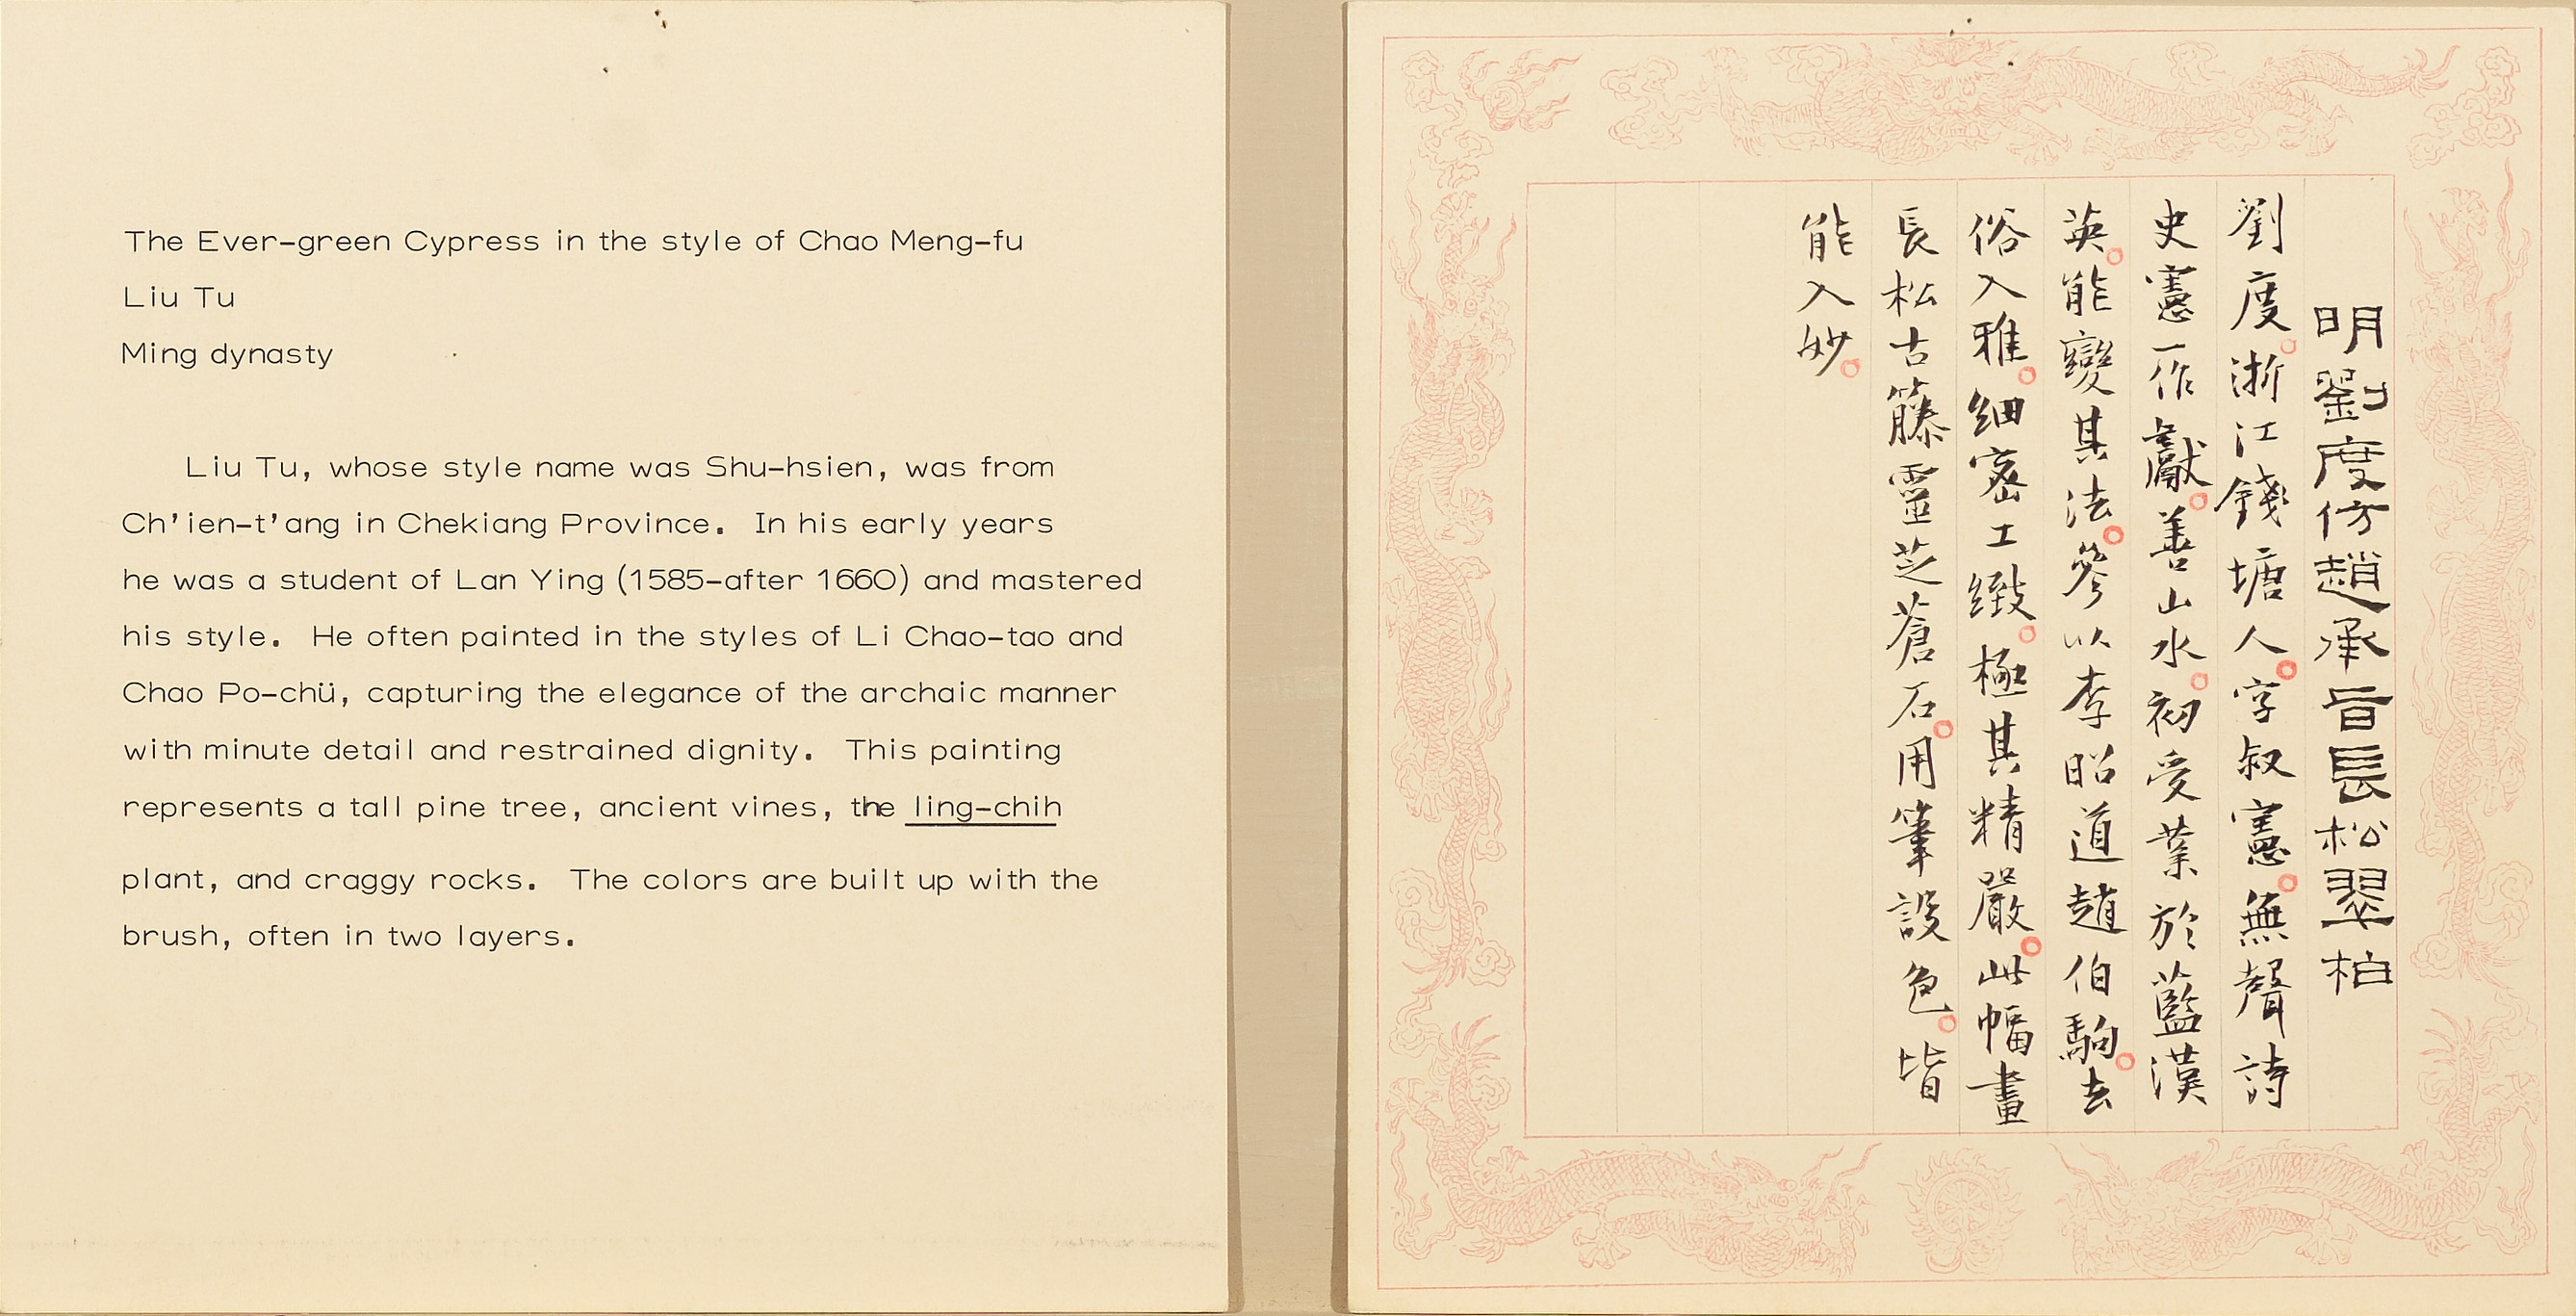 Dragon-border museum cards had already begun to be used in the 1980s, but early versions still were written in brush and ink. This Chinese card was calligraphed by Chiang Chao-shen.